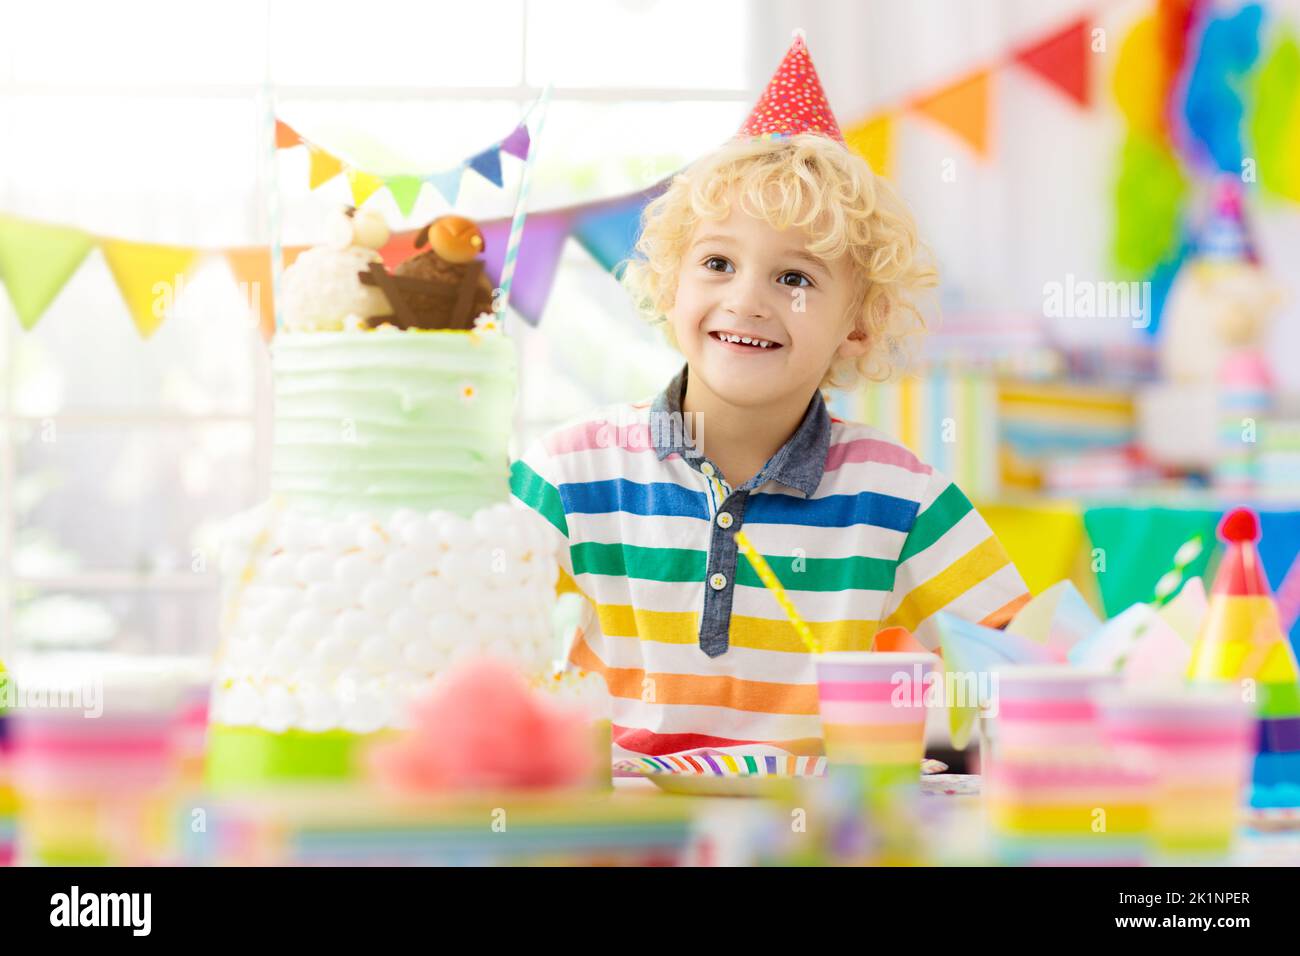 Kids birthday party. Child blowing out candles on colorful cake. Decorated home with rainbow flag banners, balloons. Farm animals theme celebration. L Stock Photo